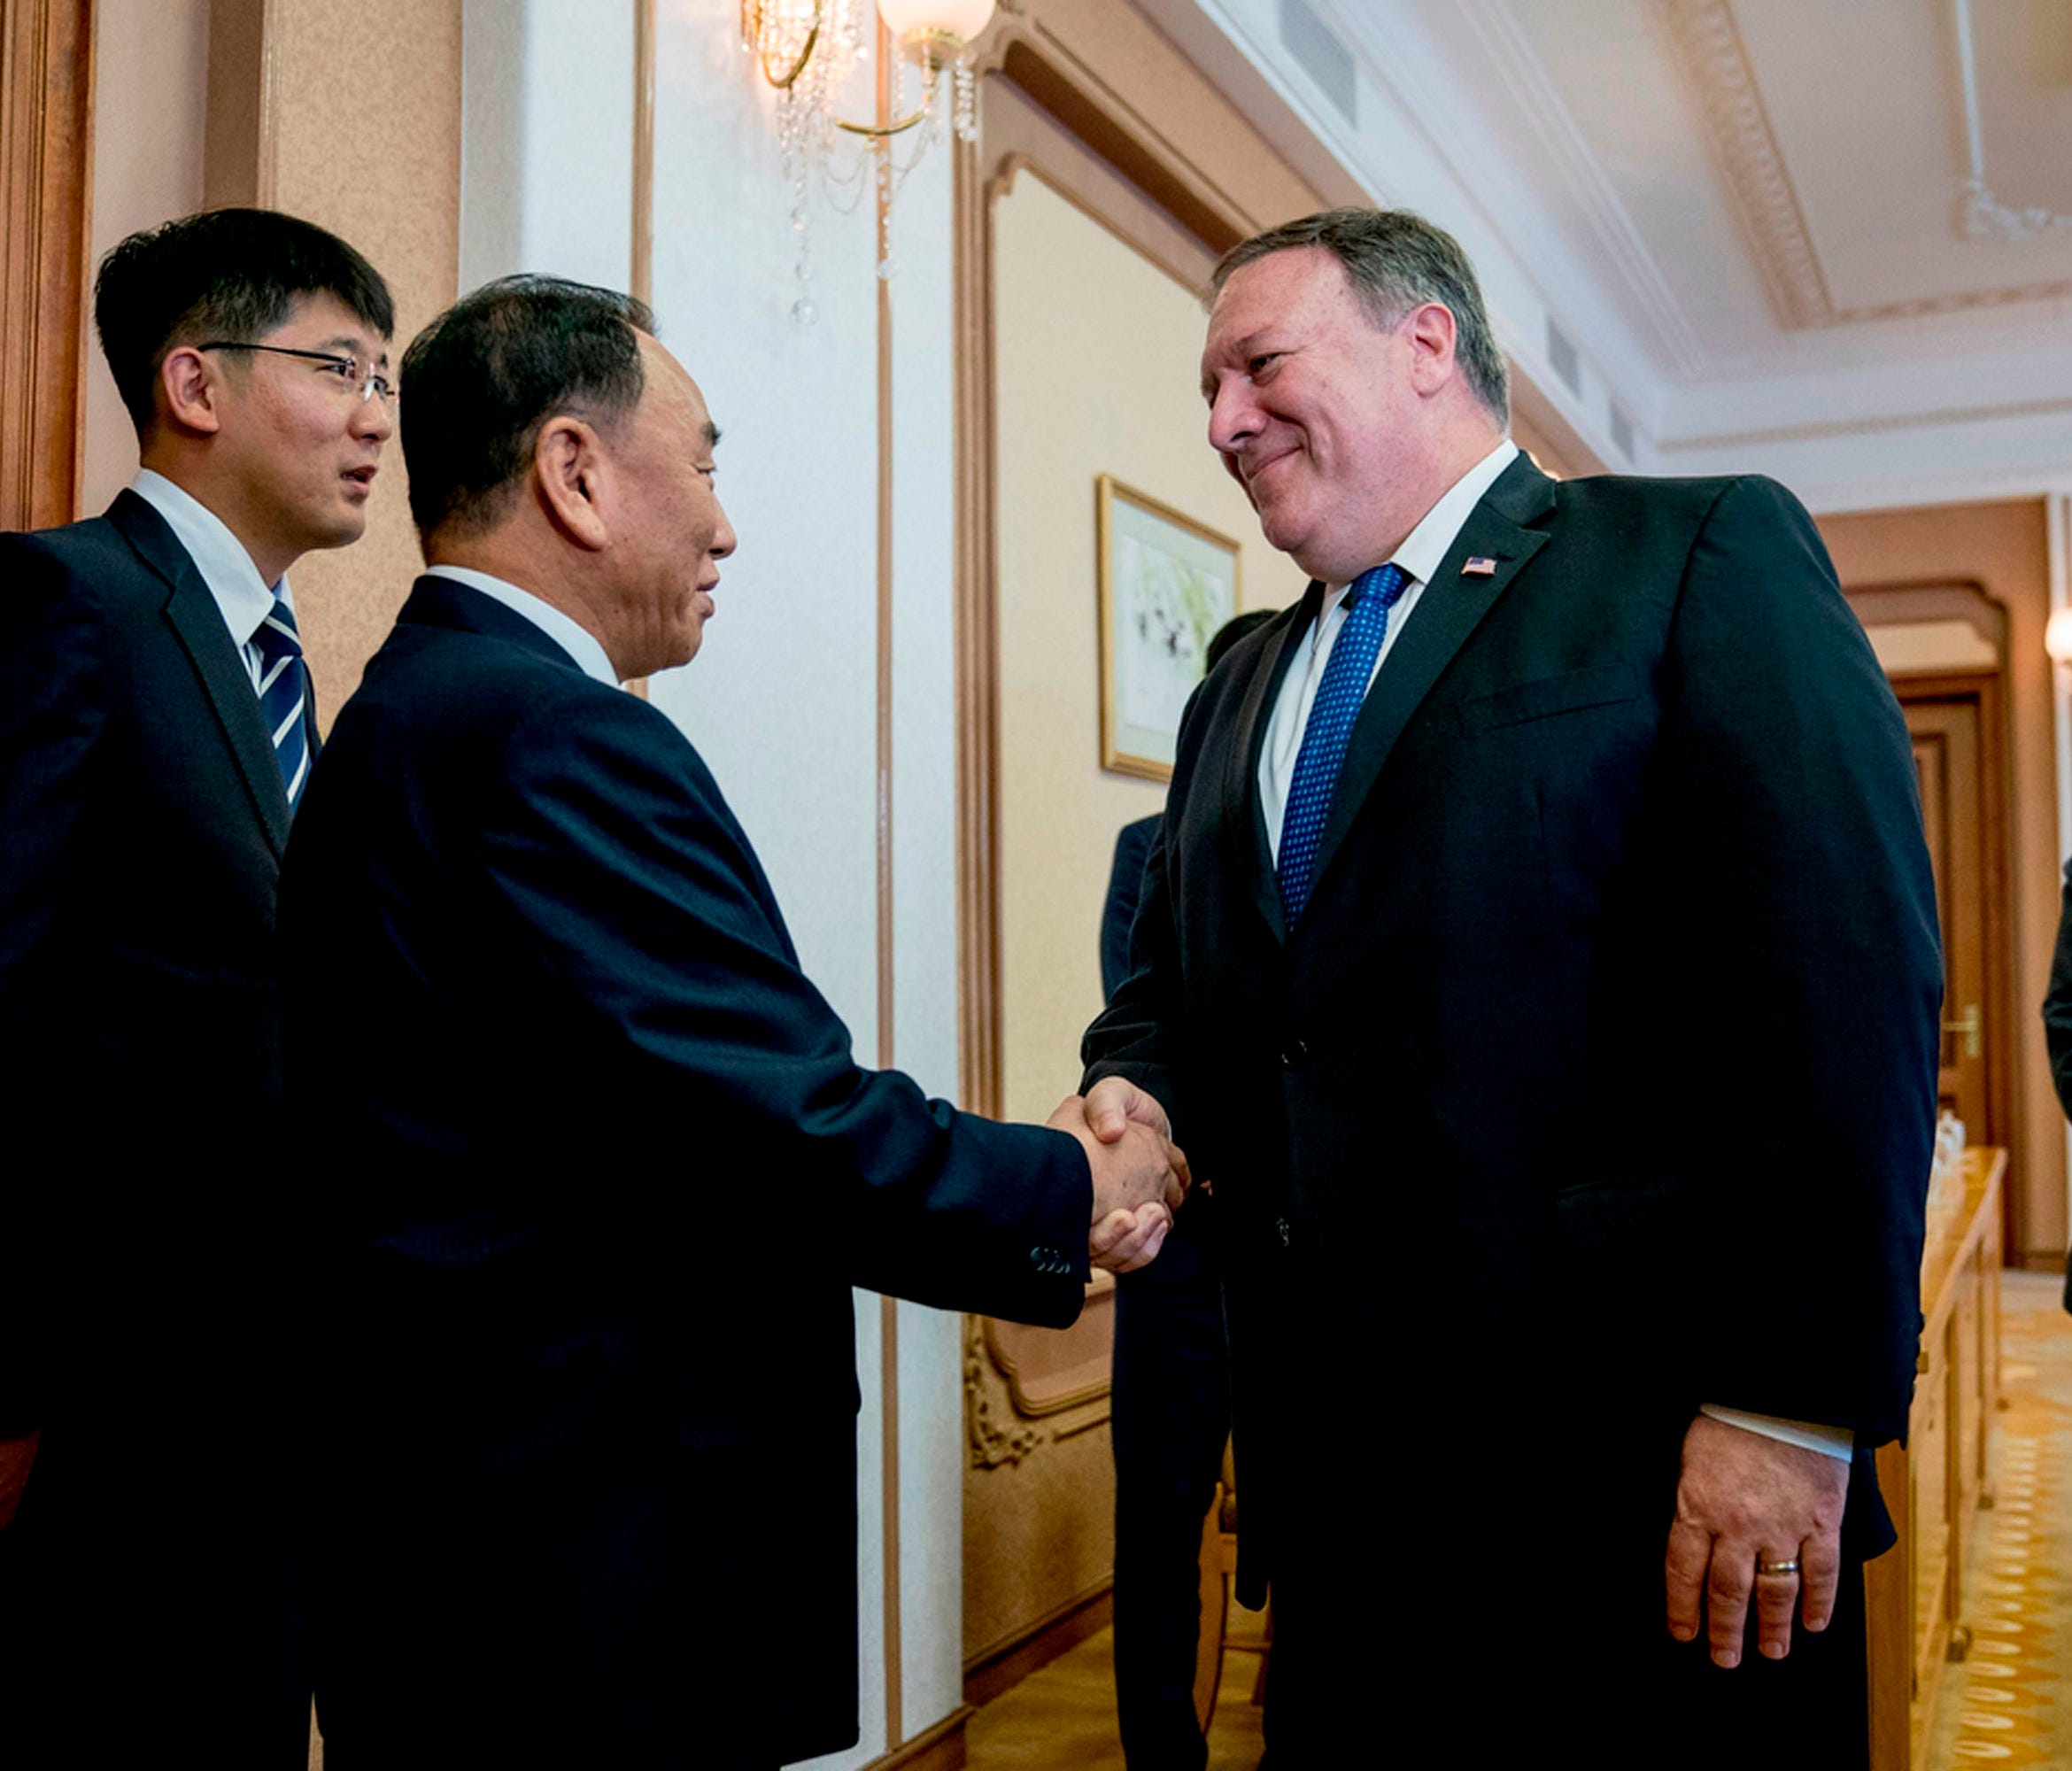 Secretary of State Mike Pompeo greets North Korea's director of the United Front Department, Kim Yong Chol as they arrive for a meeting at the Park Hwa Guest House in Pyongyang on July 6, 2018.